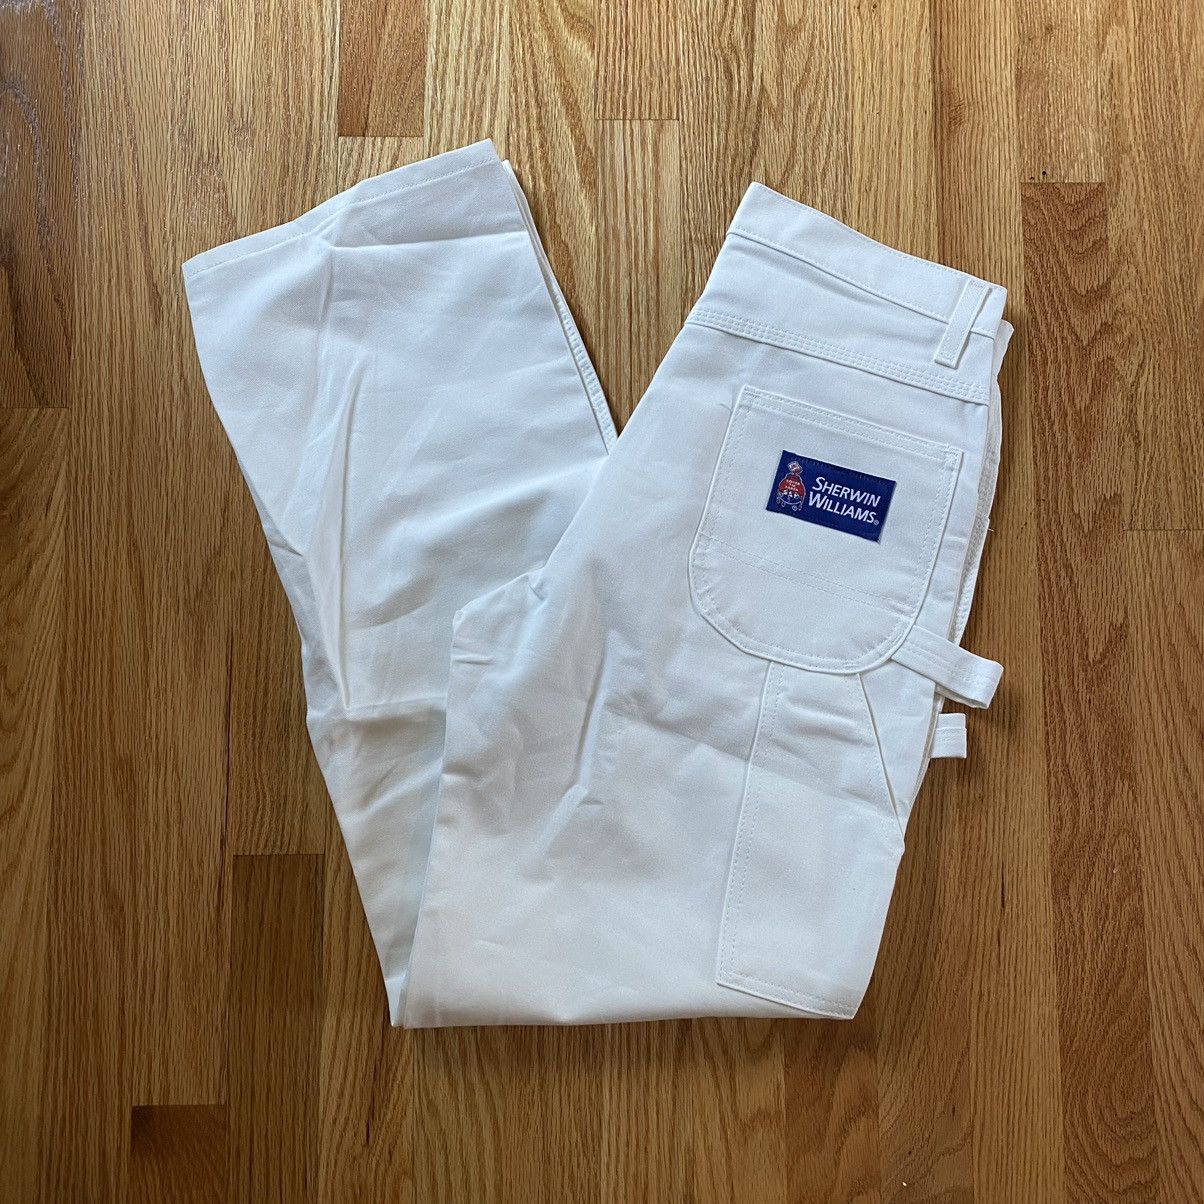 Dickies NEW WITH TAGS Dickies Sherwin Williams Painter Pants 30x32